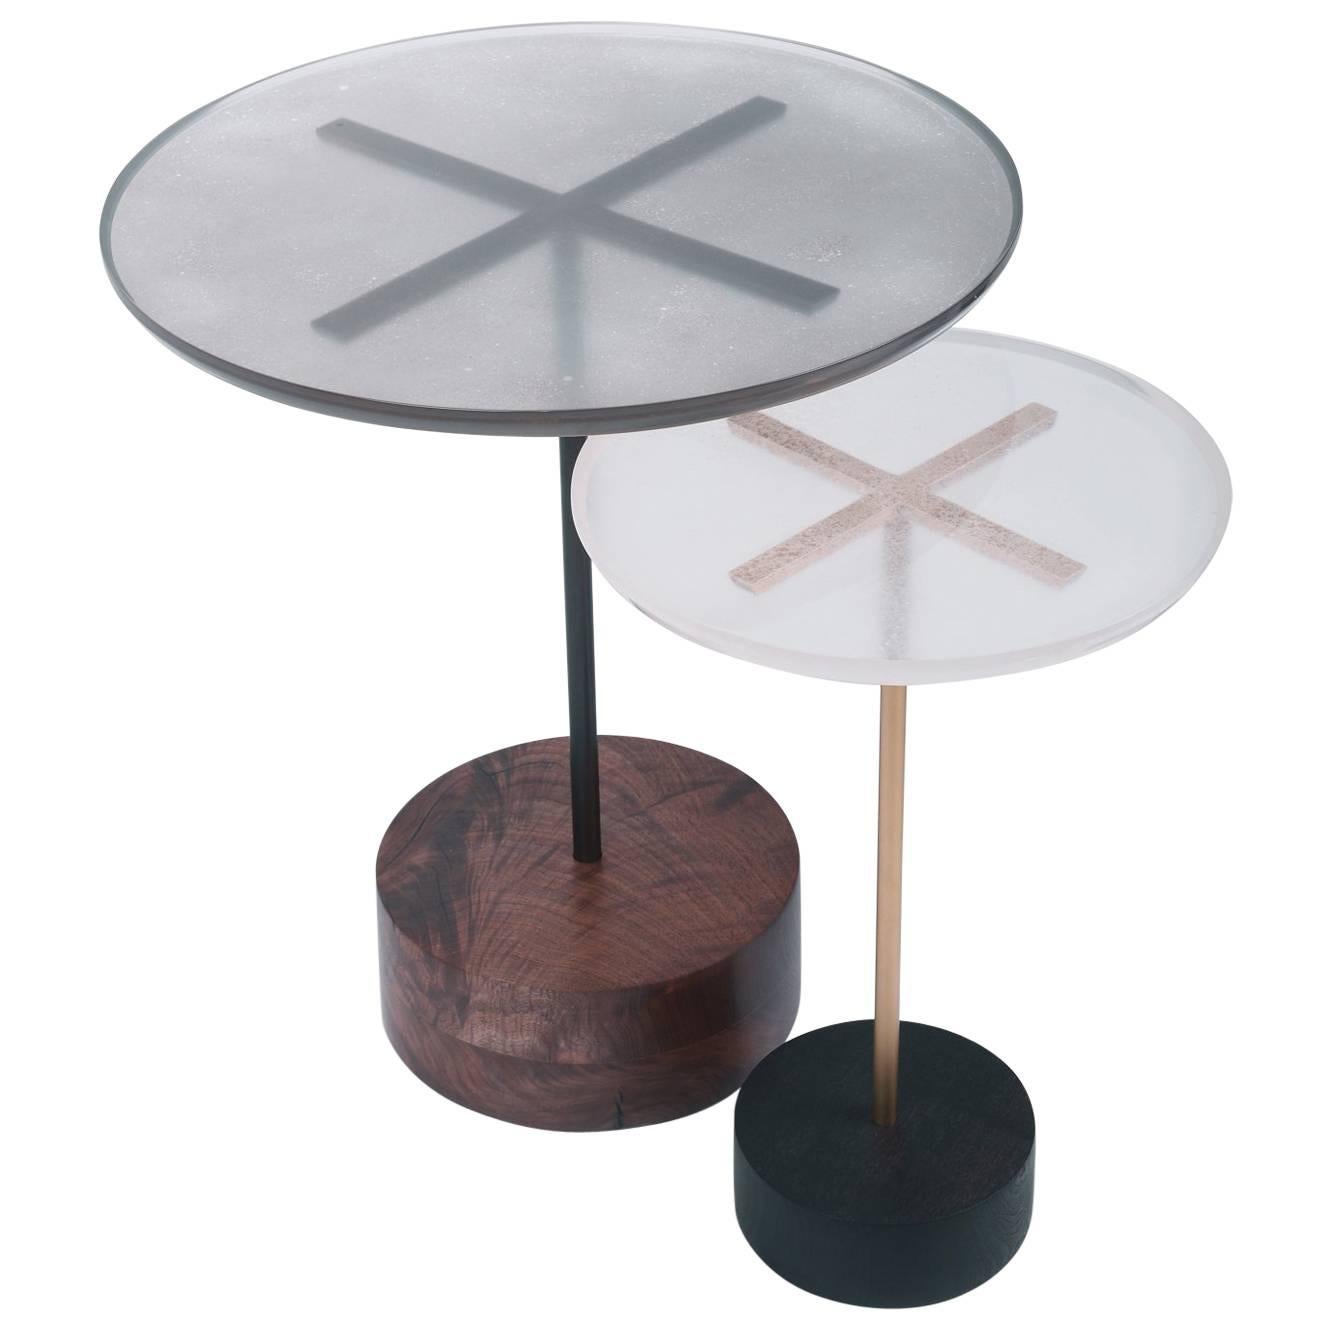 Stella End Tables, Customizable Wood, Metal, Resin and Metallic Powder For Sale